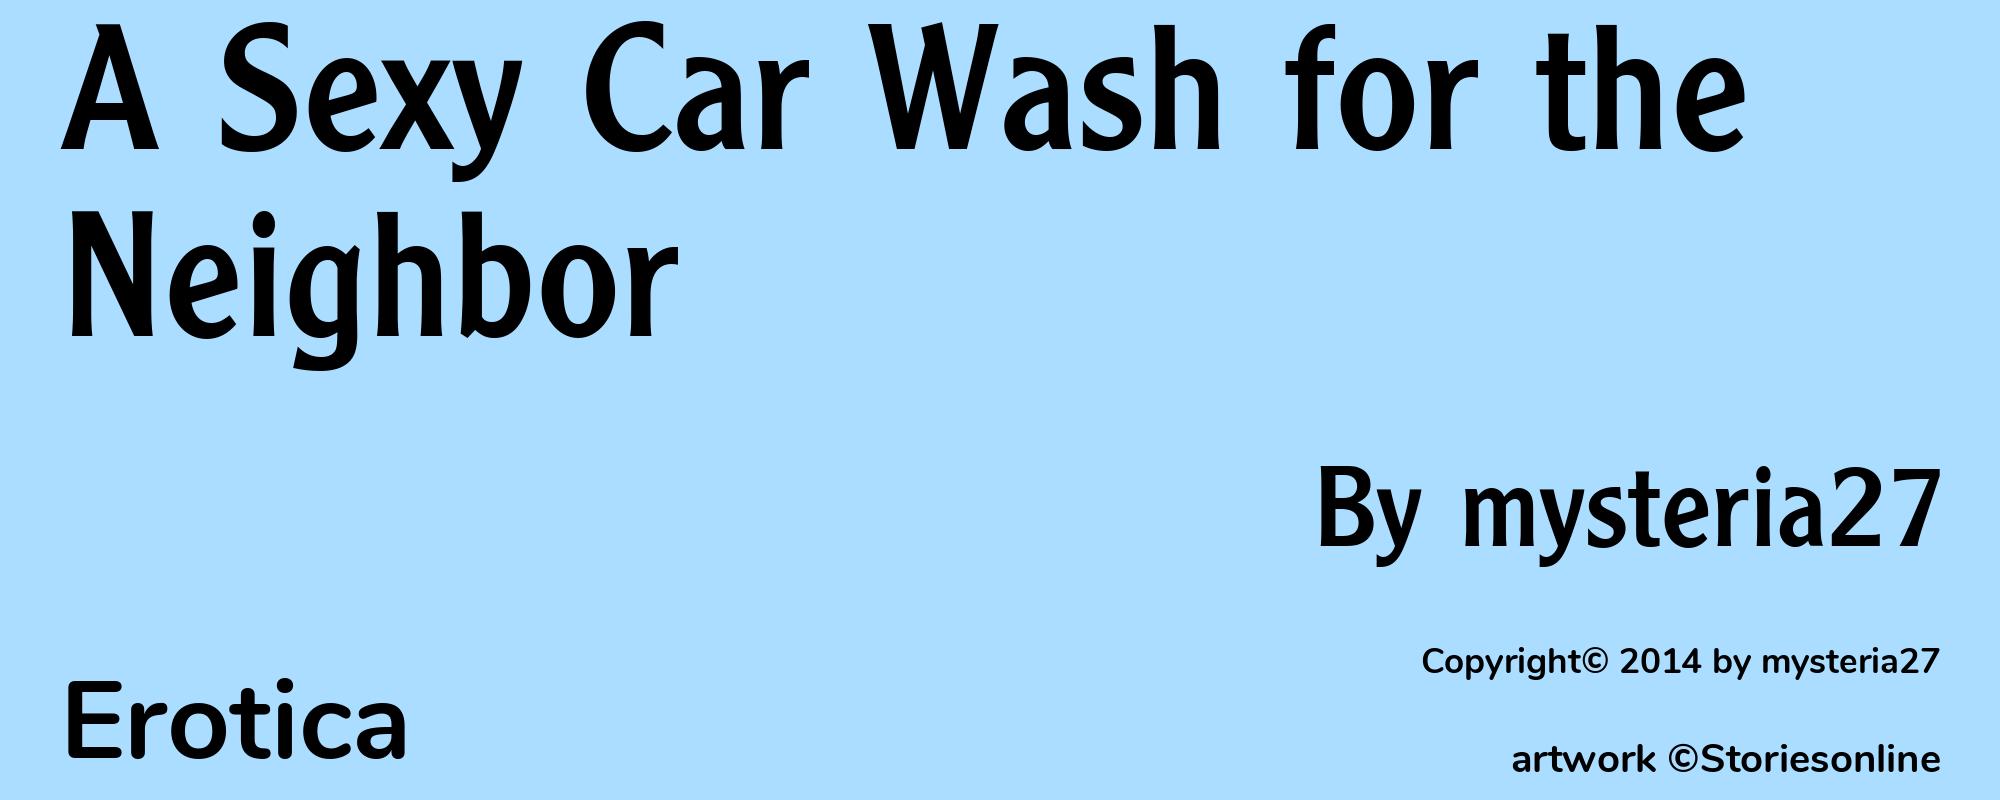 A Sexy Car Wash for the Neighbor - Cover